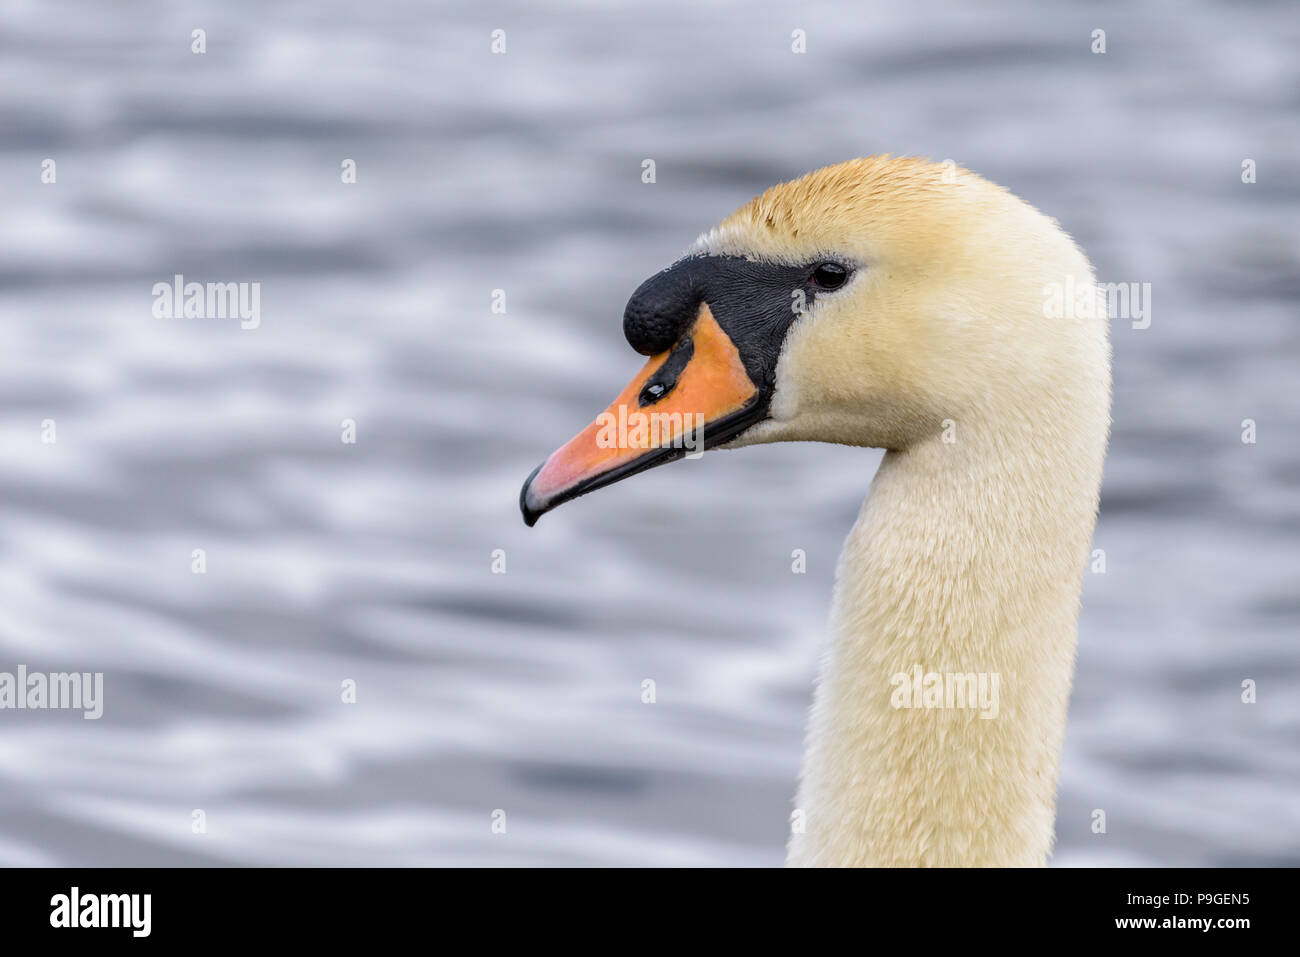 Portrait of a mute swan  (sygnus olor) isolated against water in the background. Stock Photo